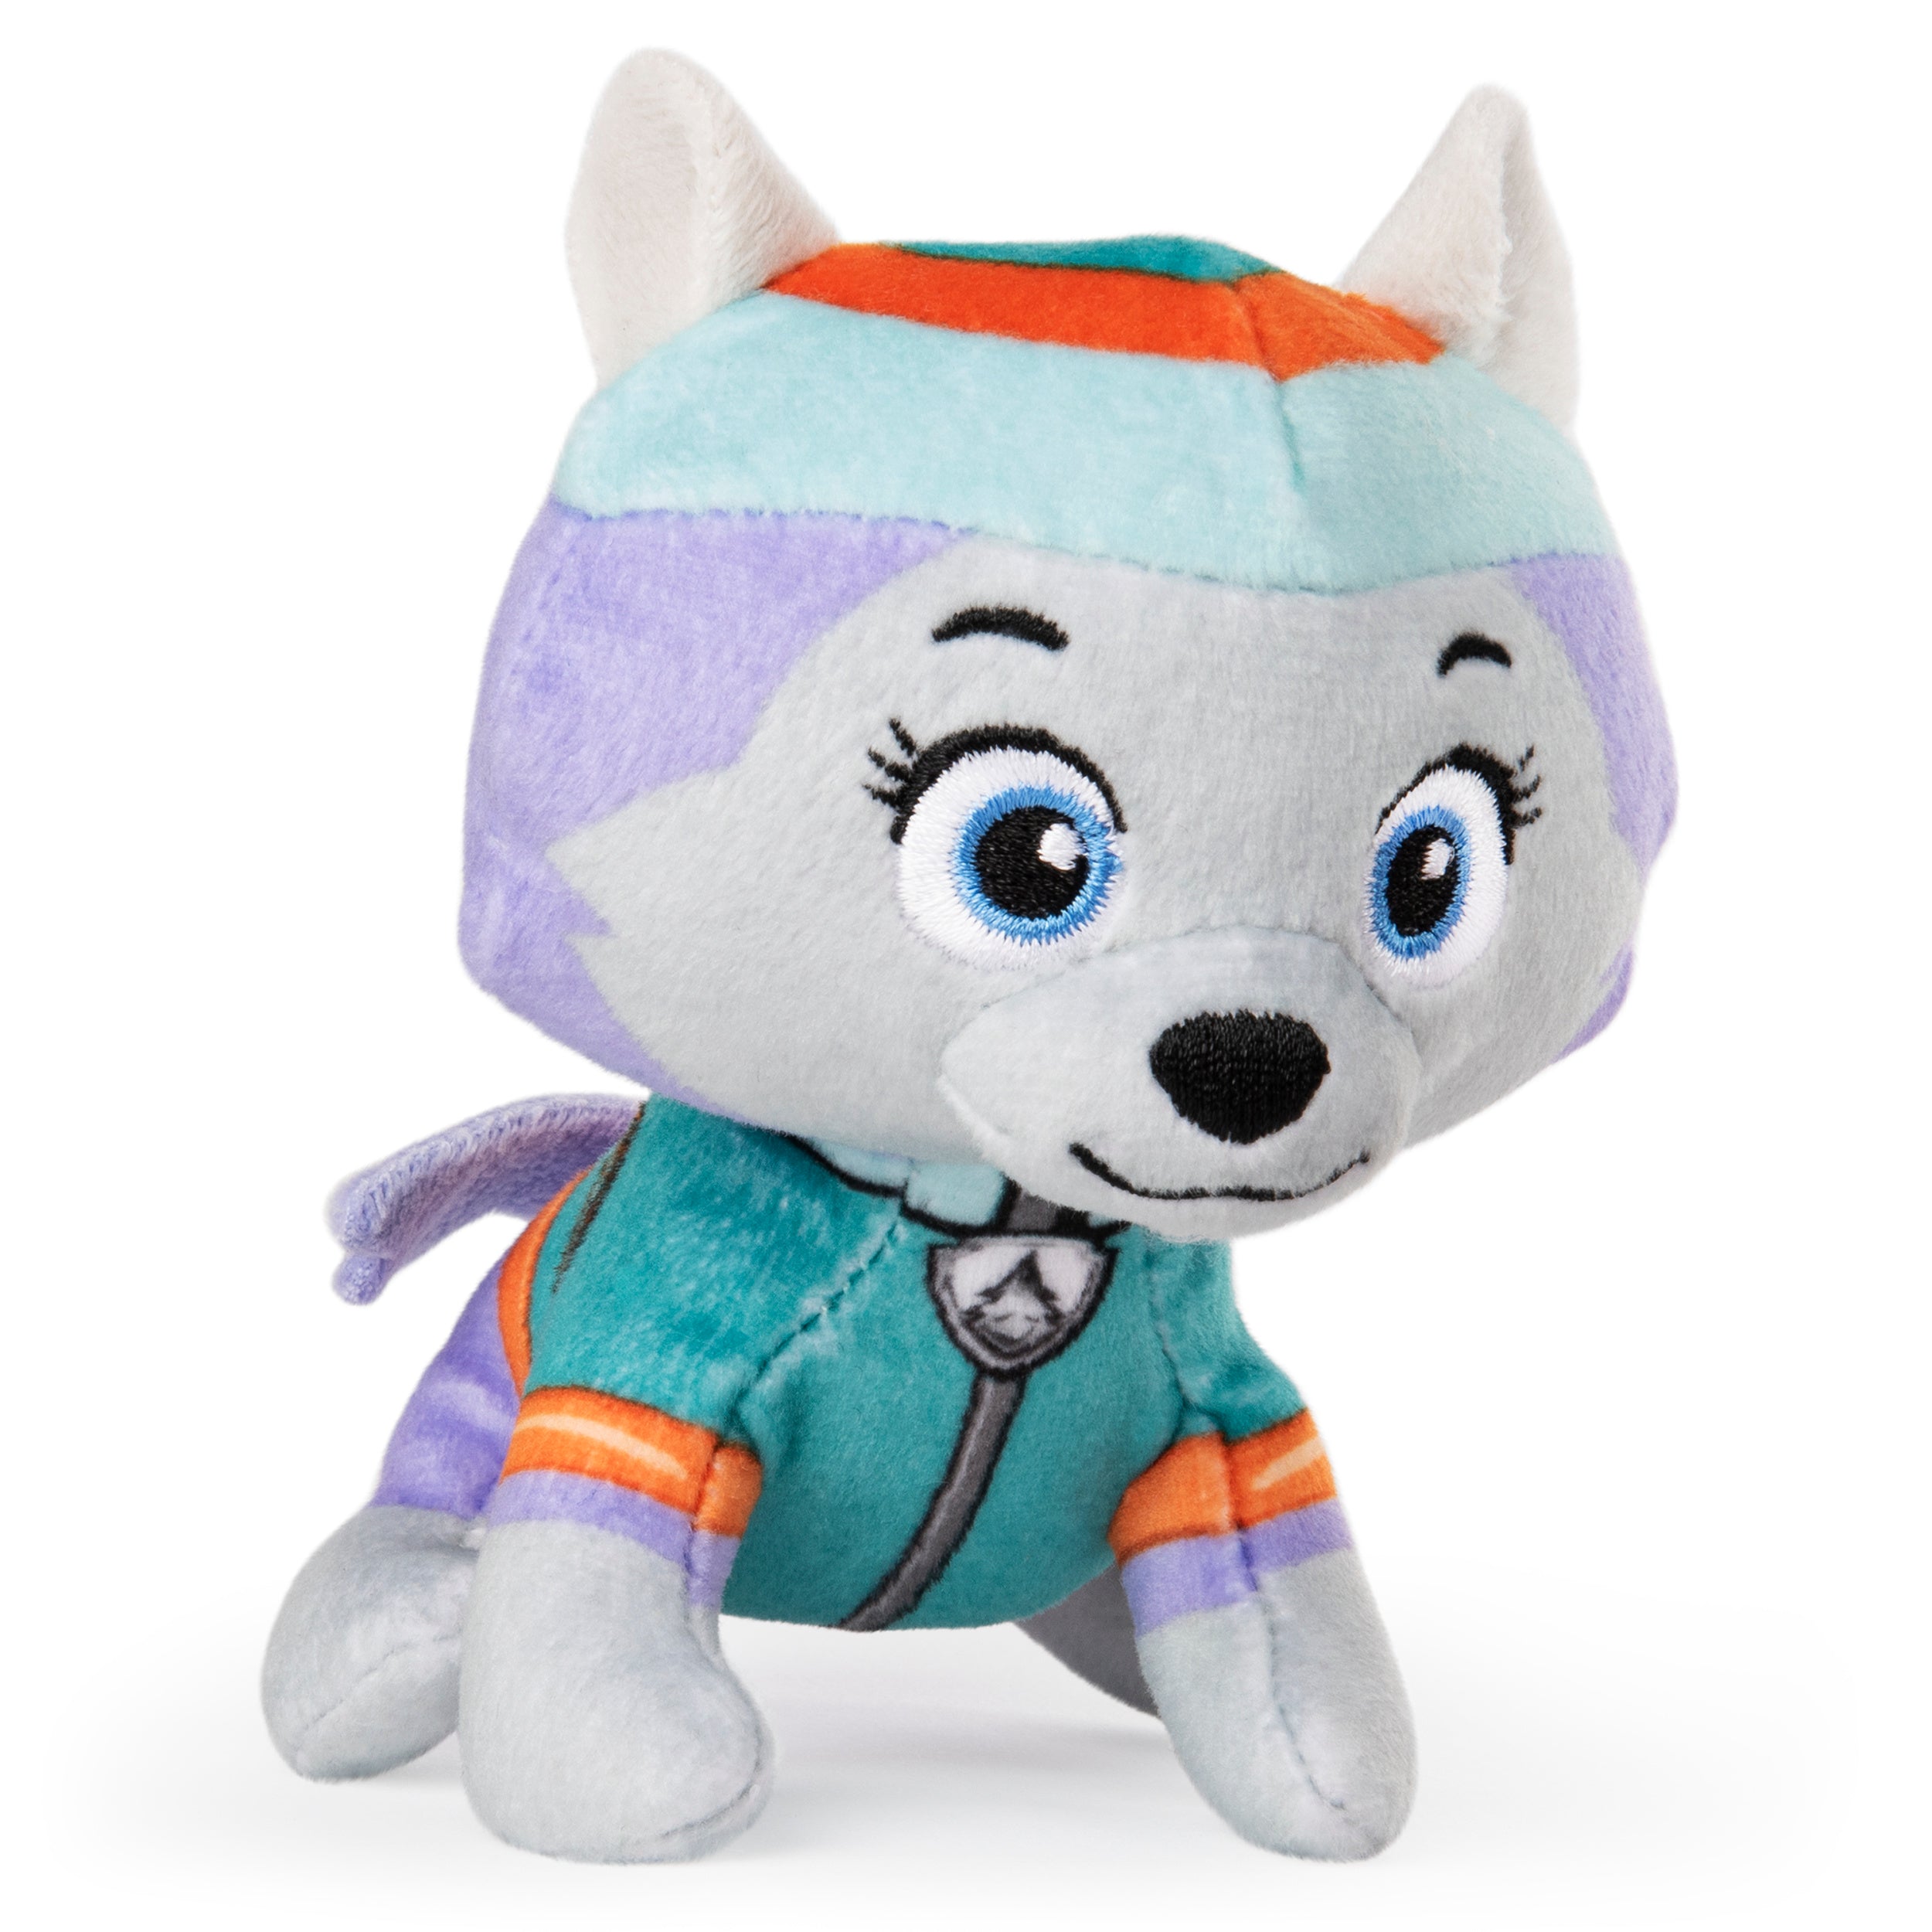 GUND PAW Patrol Tracker Plush, Official Toy from The Hit Cartoon, Stuffed  Animal for Ages 1 and Up, 6”